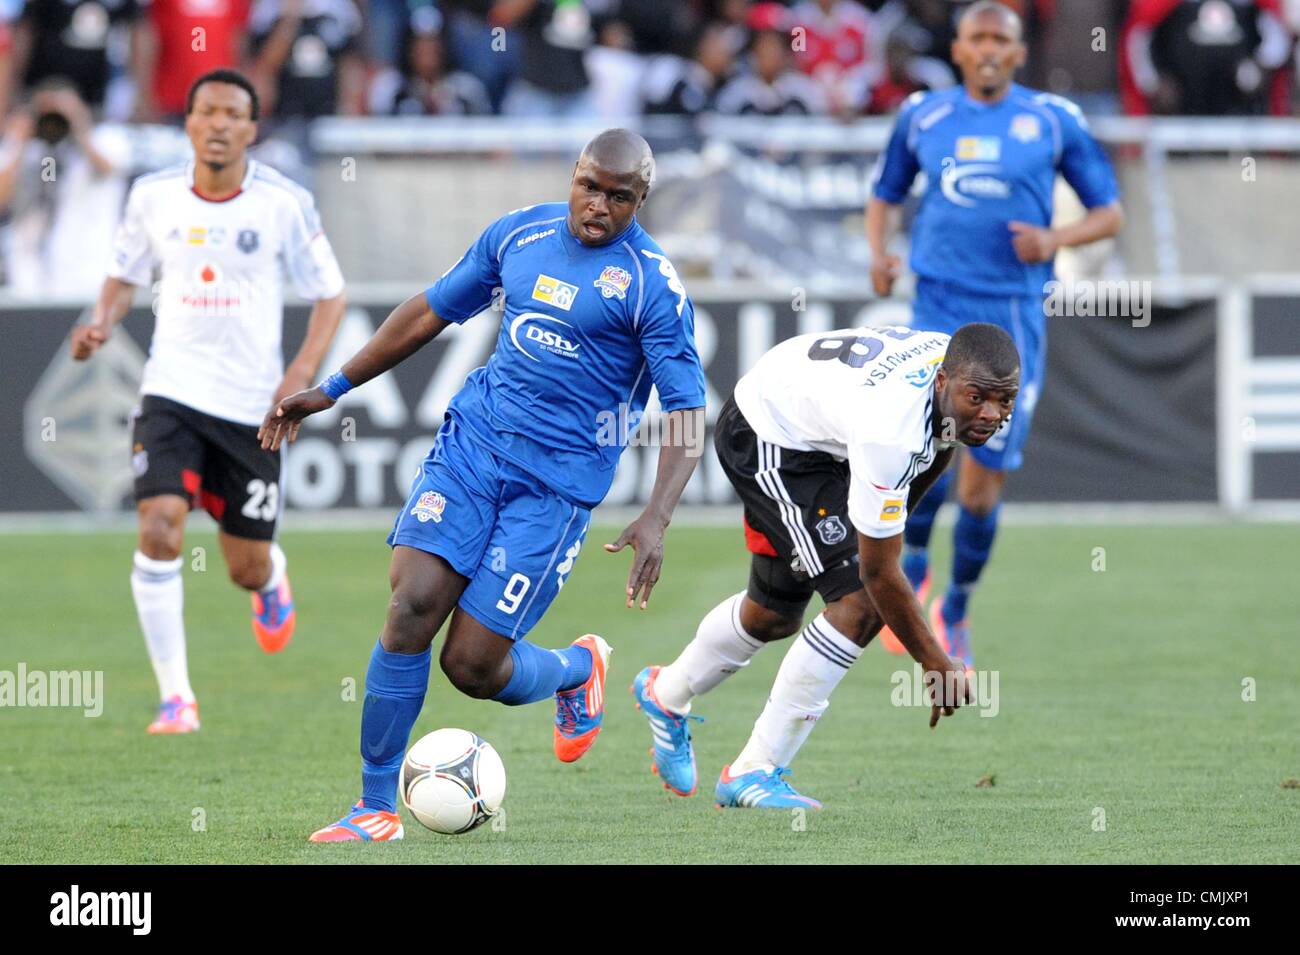 POLOKWANE, SOUTH AFRICA - AUGUST 19, Thabiso Nkoana during the MTN 8 1st leg semi final match between SuperSport United and Orlando Pirates at Peter Mokaba Stadium on August 19, 2012 in Polokwane, South Africa Photo by Lee Warren / Gallo Images Stock Photo